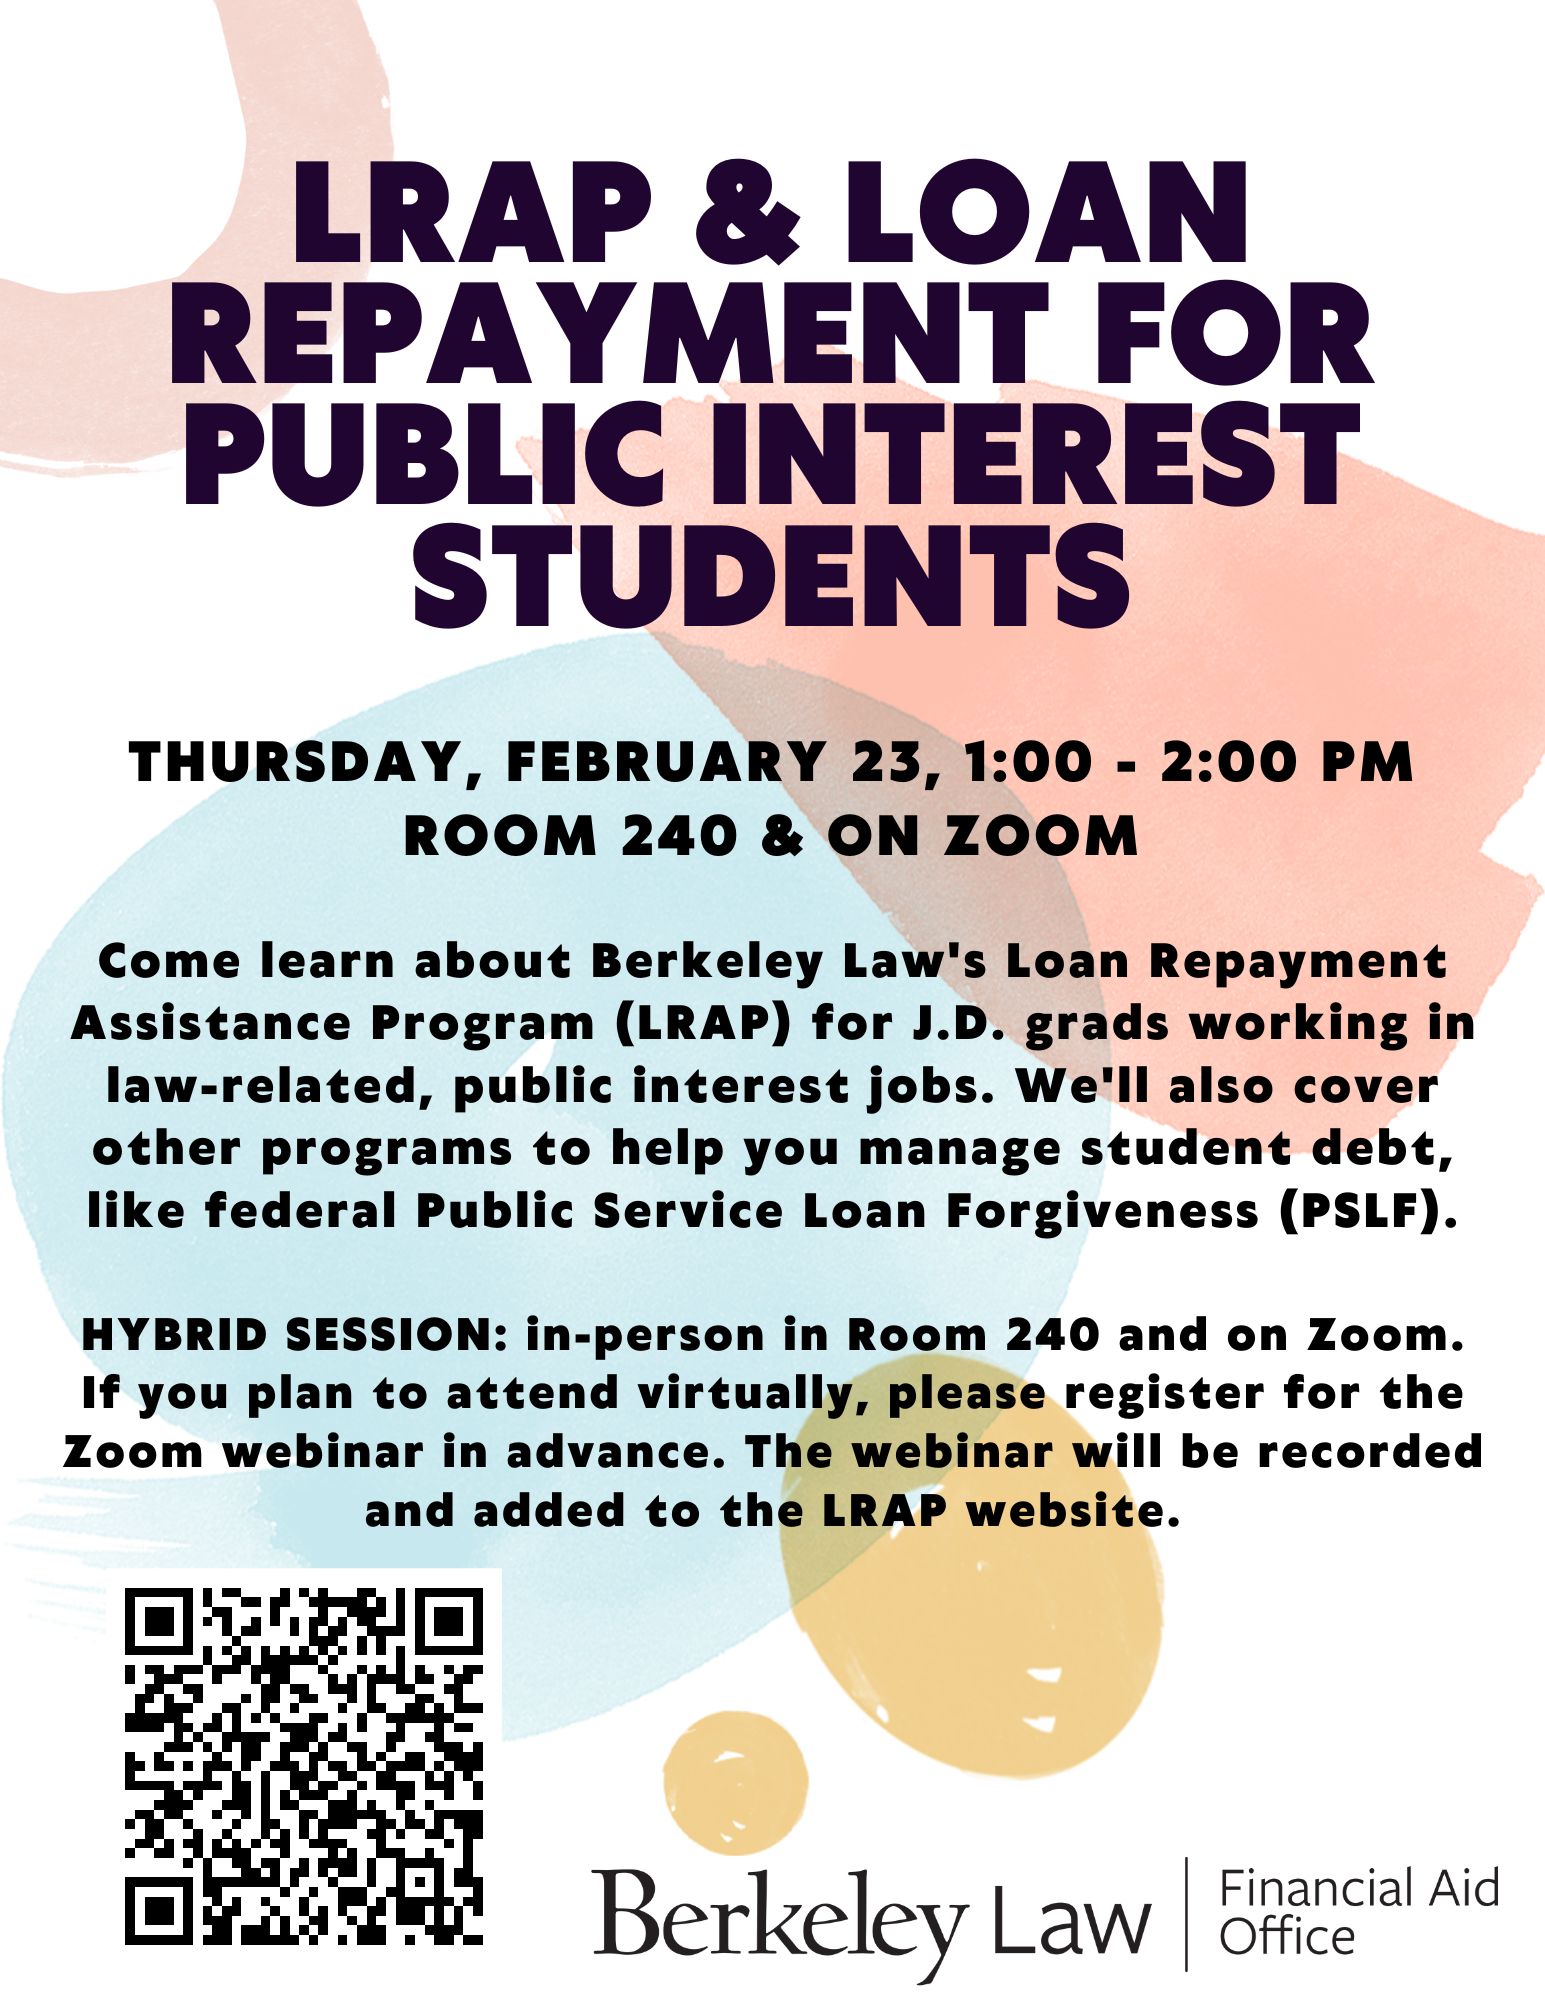 LRAP & loan repayment for public interest students. Thursday, february 23, 1:00 - 2:00 pm Room 240 & on Zoom. Come learn about Berkeley Law's Loan Repayment Assistance Program (LRAP) for J.D. grads working in law-related, public interest jobs. We'll also cover other programs to help you manage student debt, like federal Public Service Loan Forgiveness (PSLF).  HYBRID SESSION: in-person in Room 240 and on Zoom. If you plan to attend virtually, please register for the Zoom webinar in advance. The webinar will be recorded and added to the LRAP website.